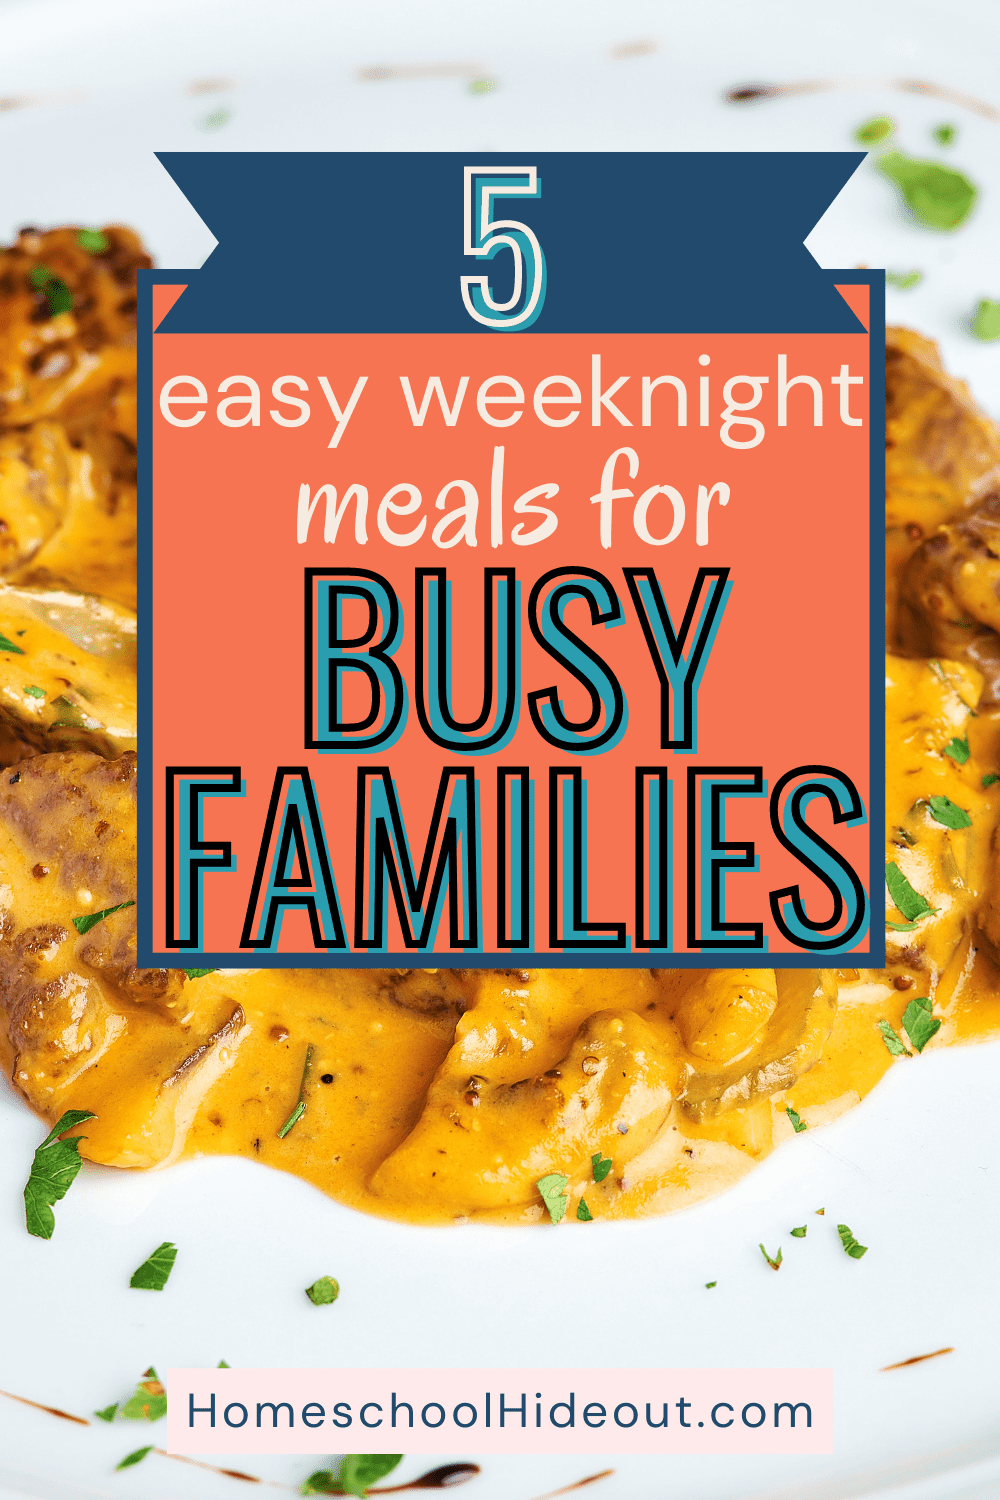 These easy meals for busy families are awesome ideas! I love #4!